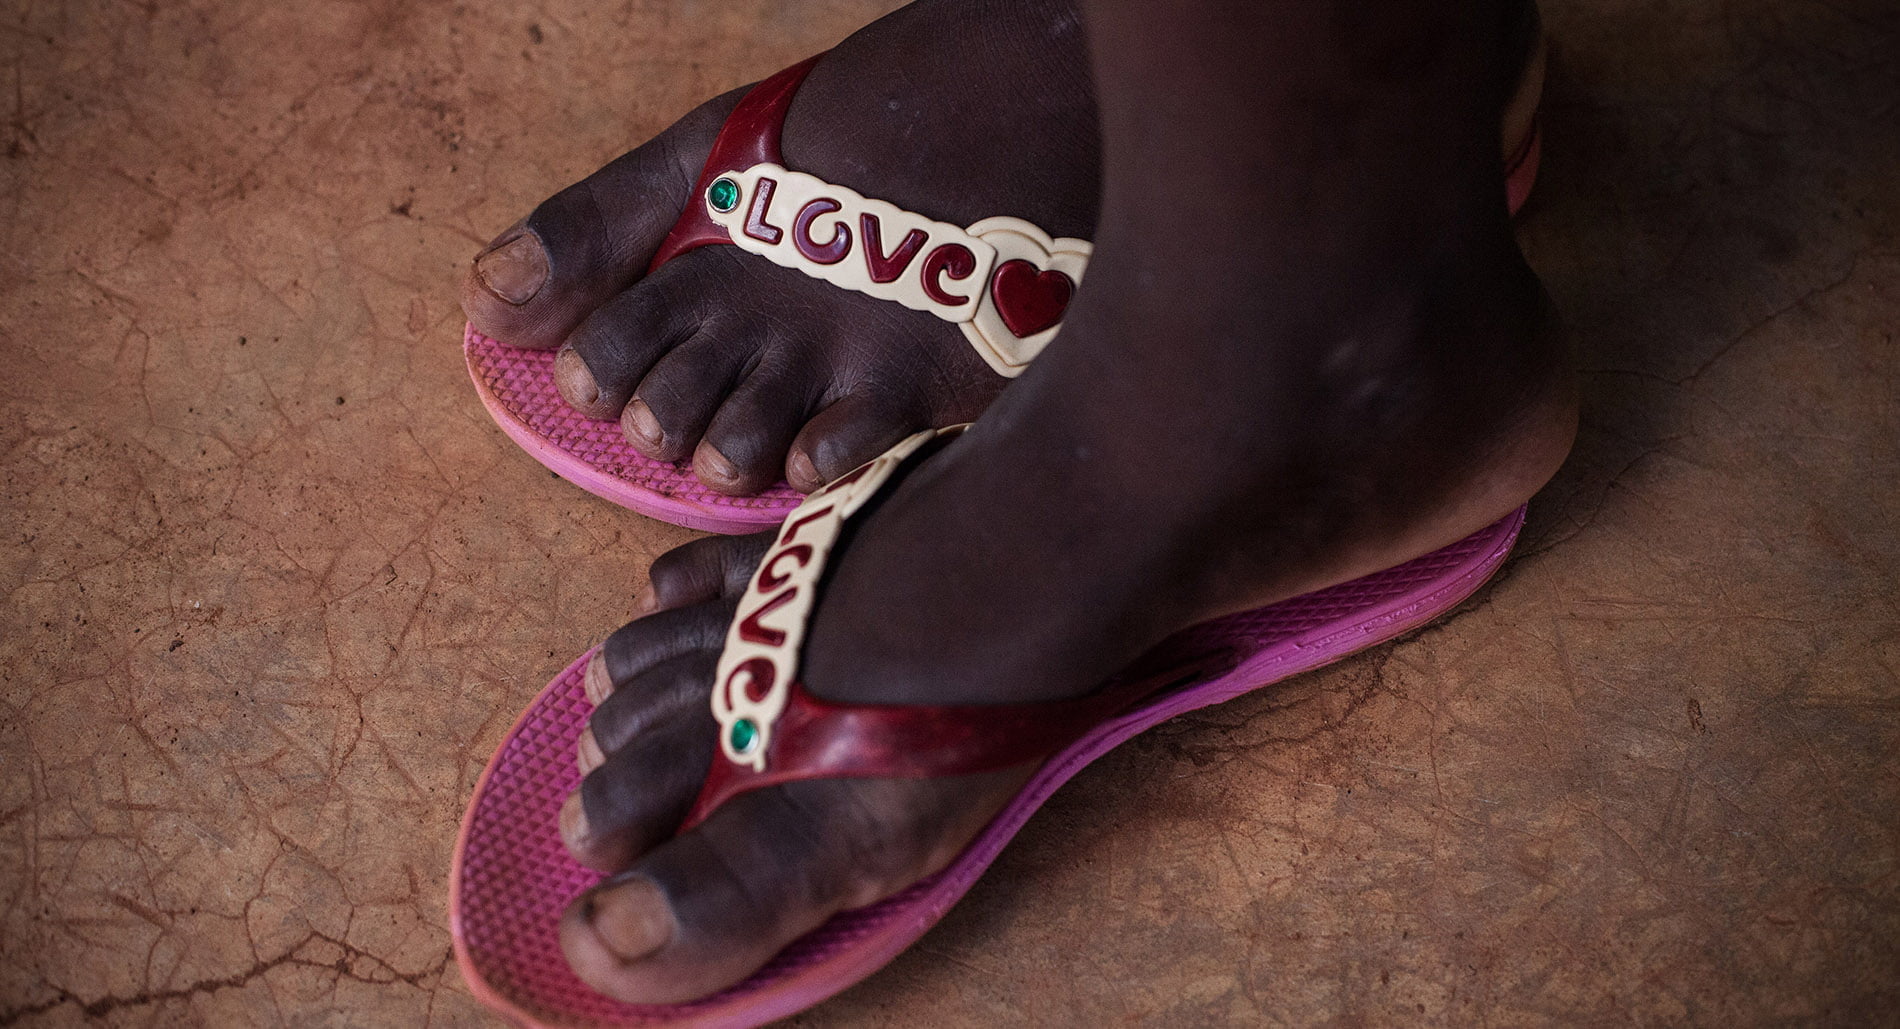 two feet with bright pink plastic sandals with 'love' written on them, standing on red soil